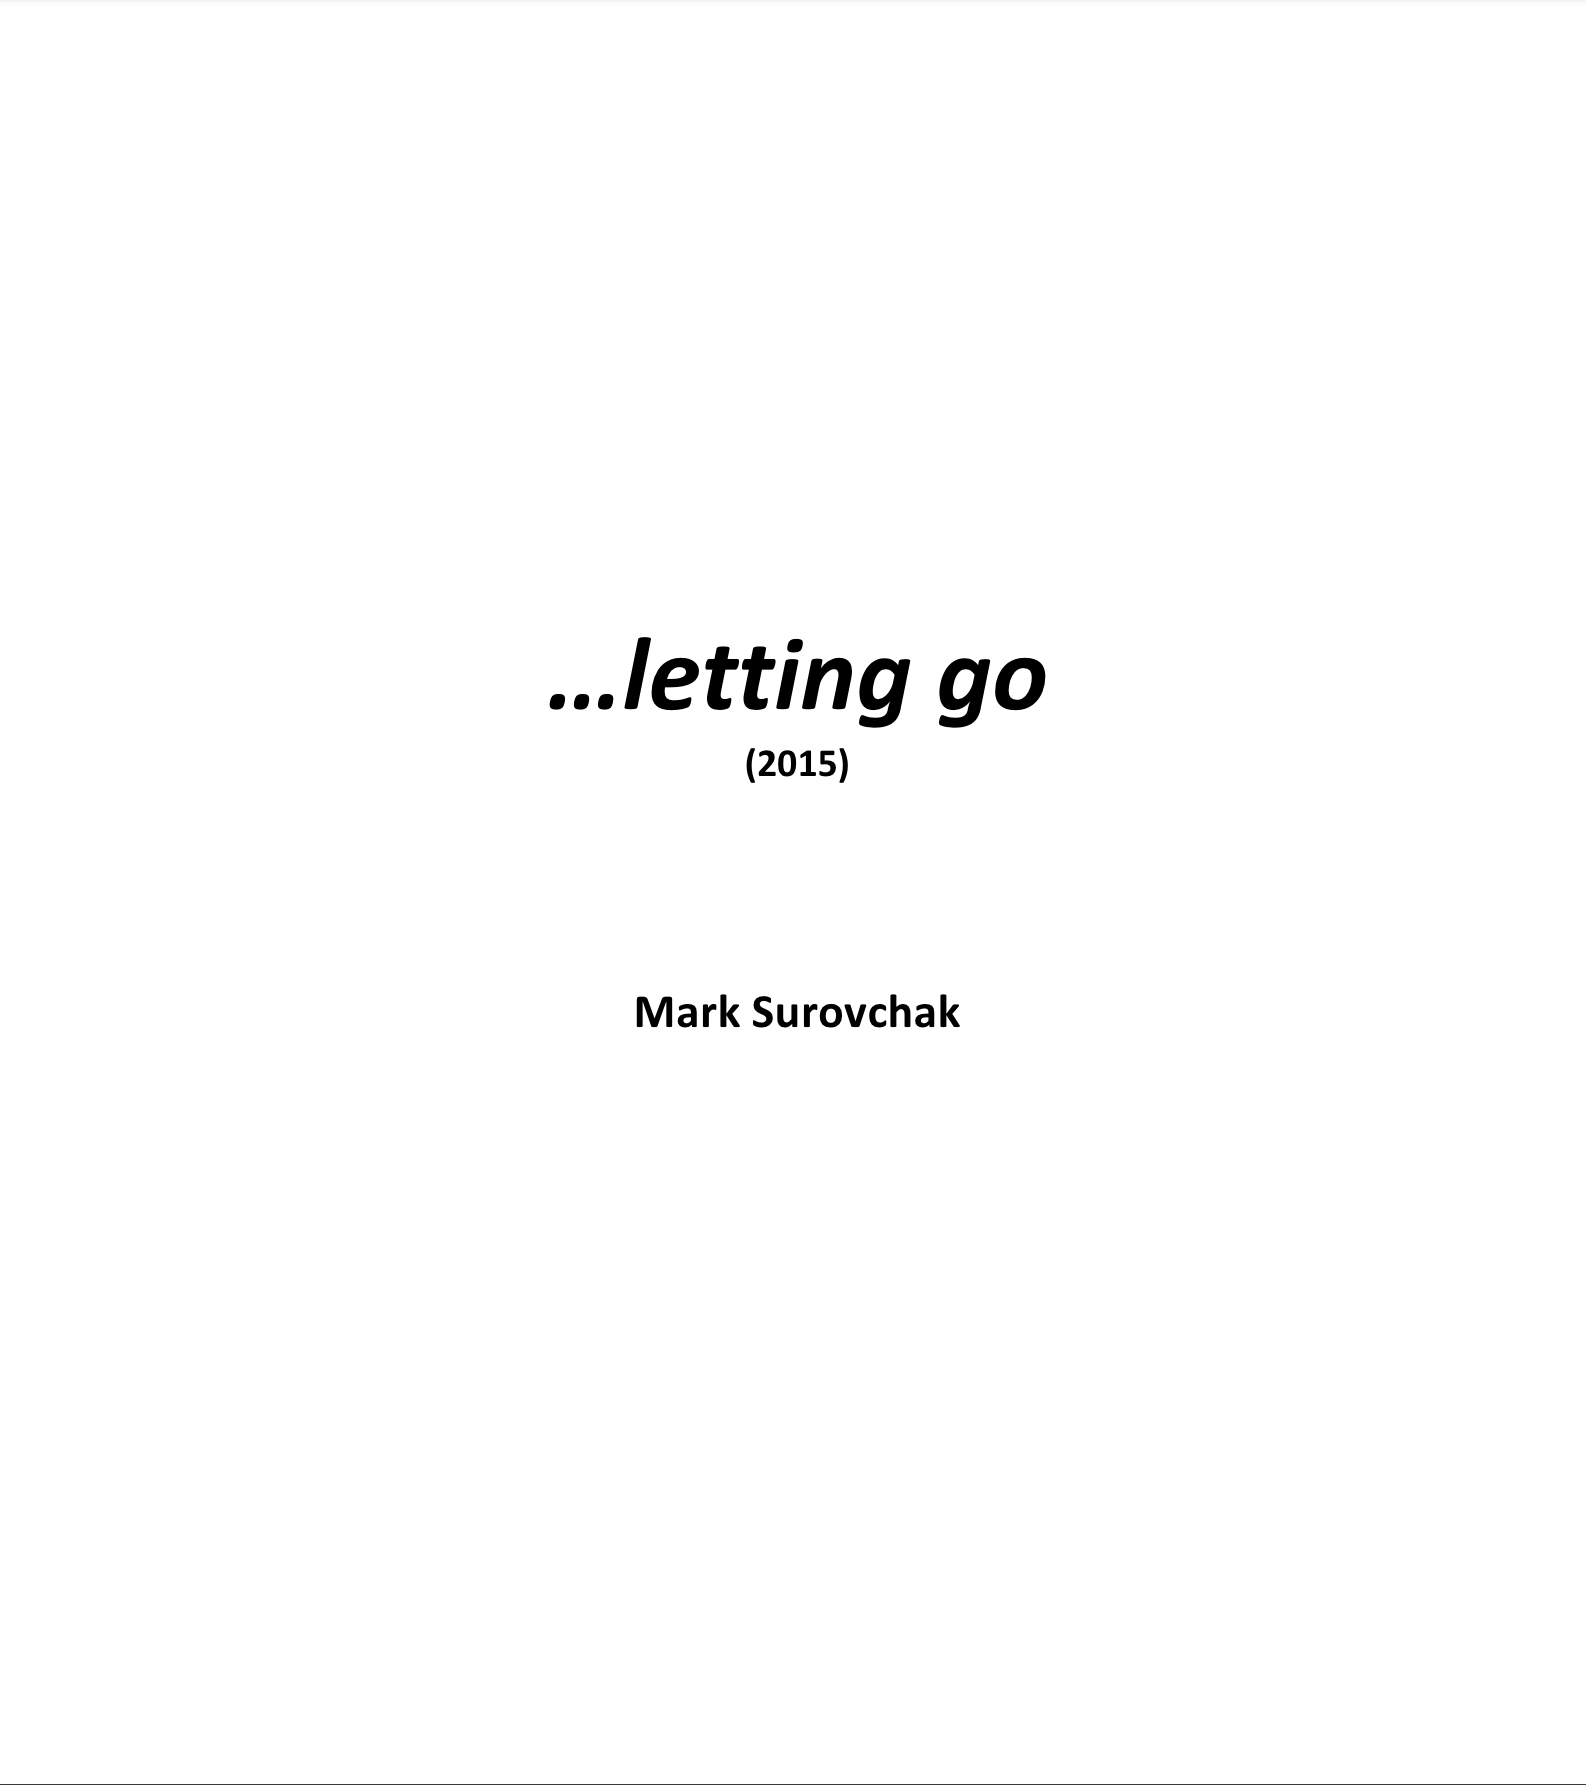 ...letting Go by Mark Surovchak